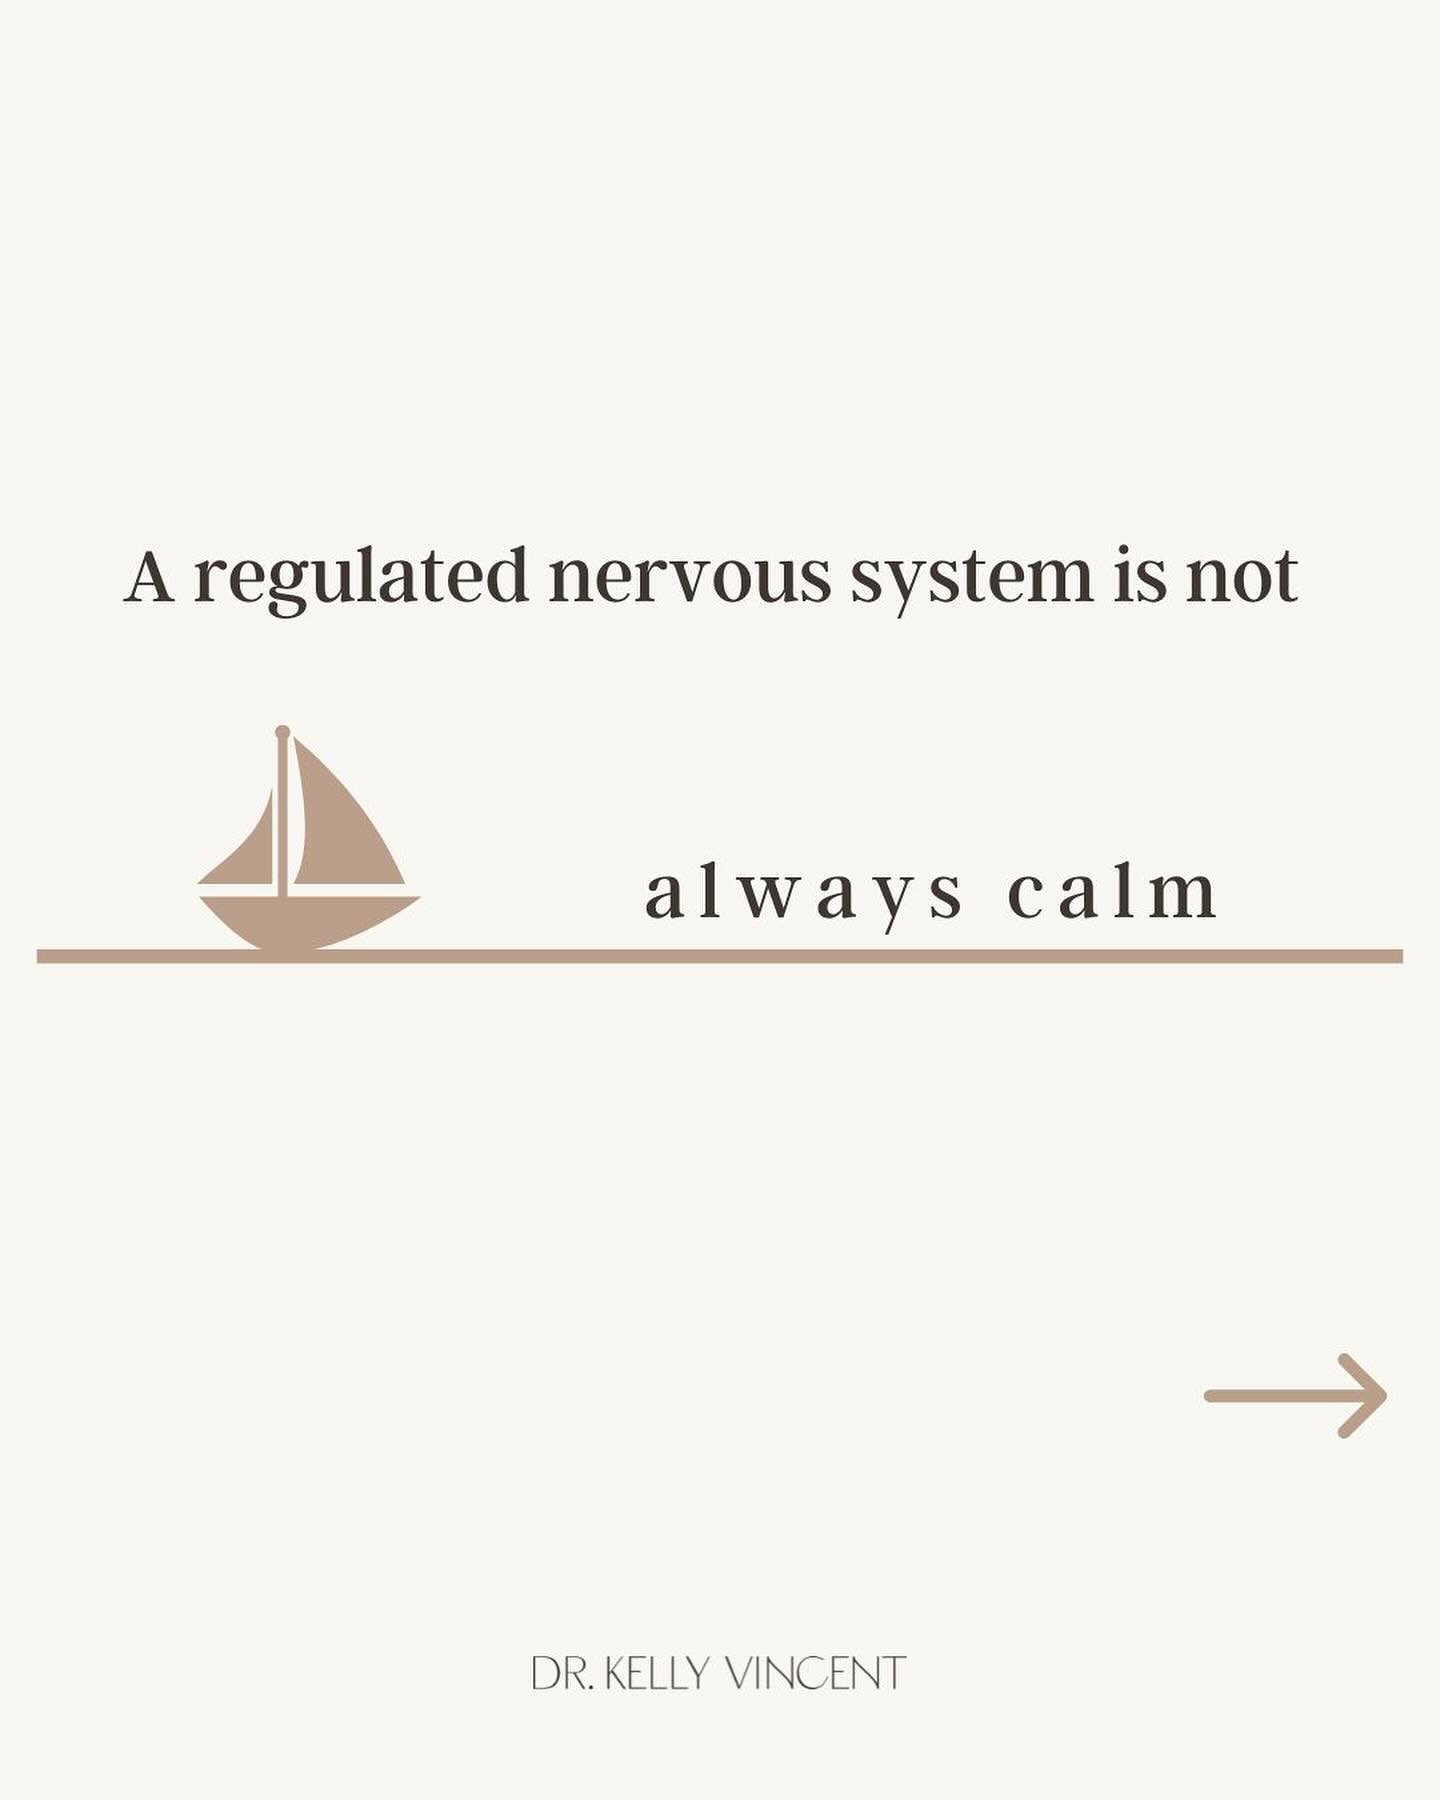 Our nervous system isn&rsquo;t built for constant calmness; 🌊 it&rsquo;s always working to keep us safe and alive. 

When it comes to regulation, our goal isn&rsquo;t perpetual calm, but rather increase the capacity and ability to handle stress 😓 a